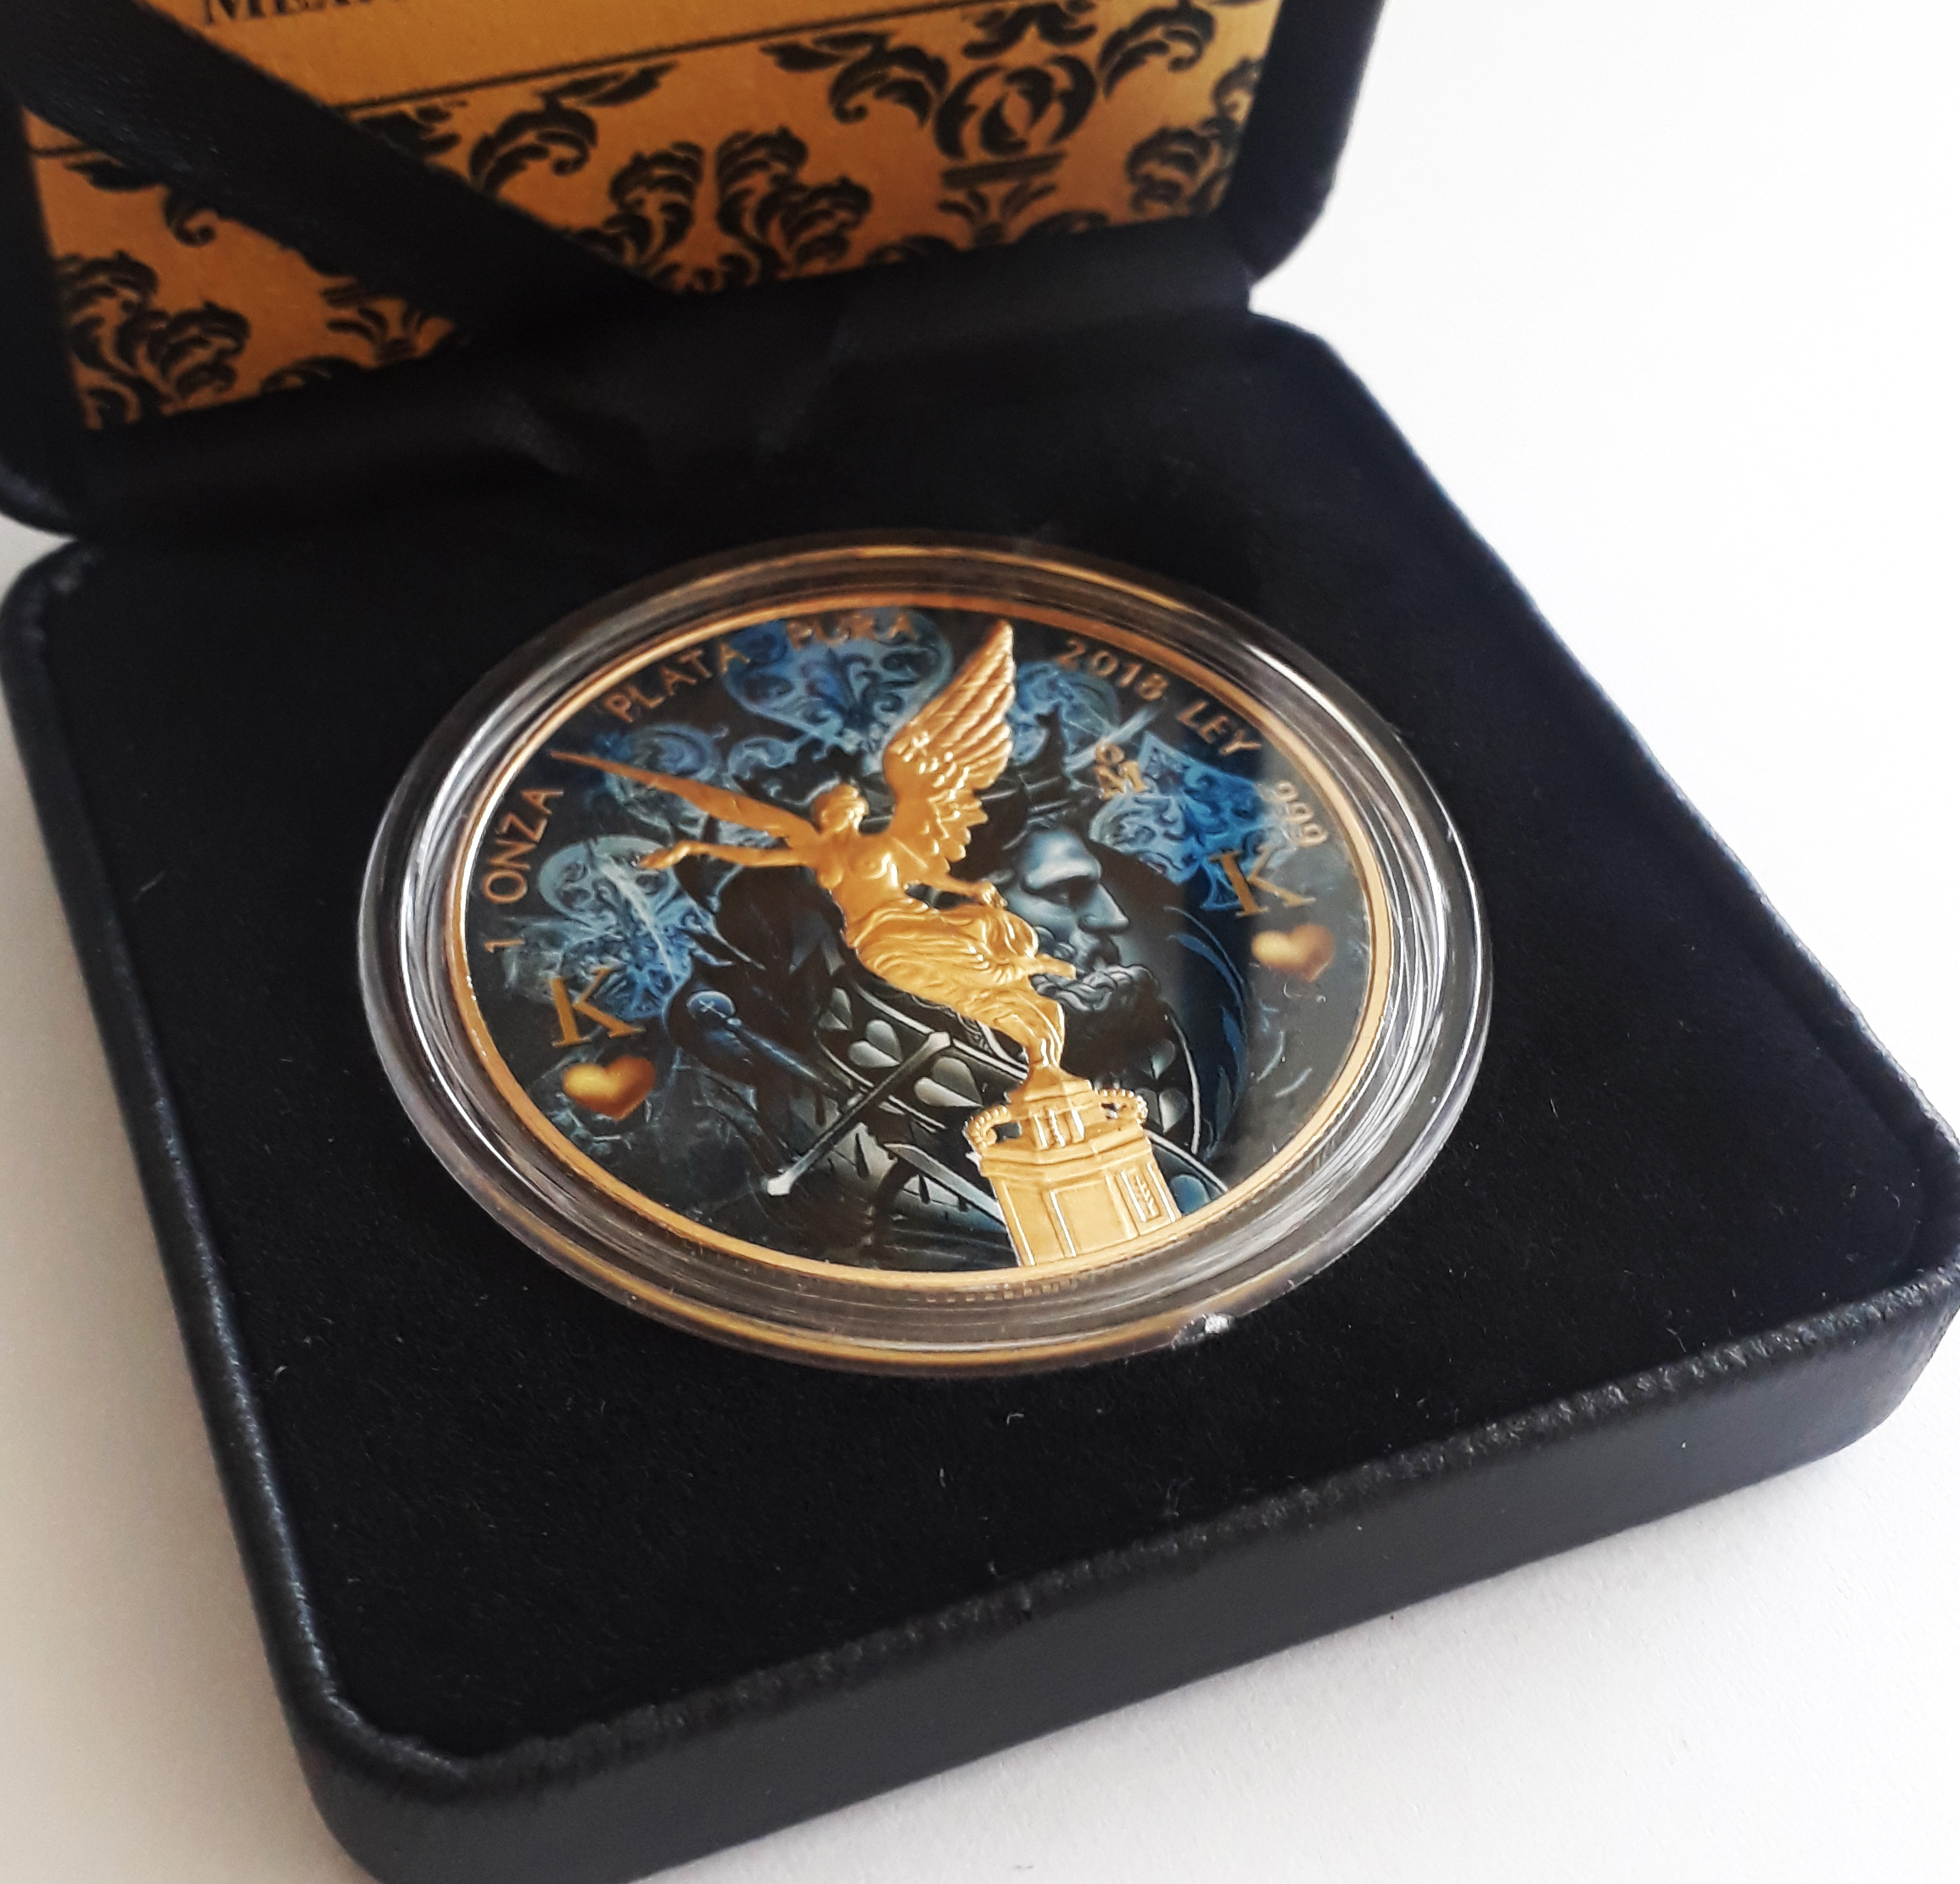 1oz 999 Silver Mexico Libertad – The King – Colorized and Gold Gilded coin  – Golden Noir Series